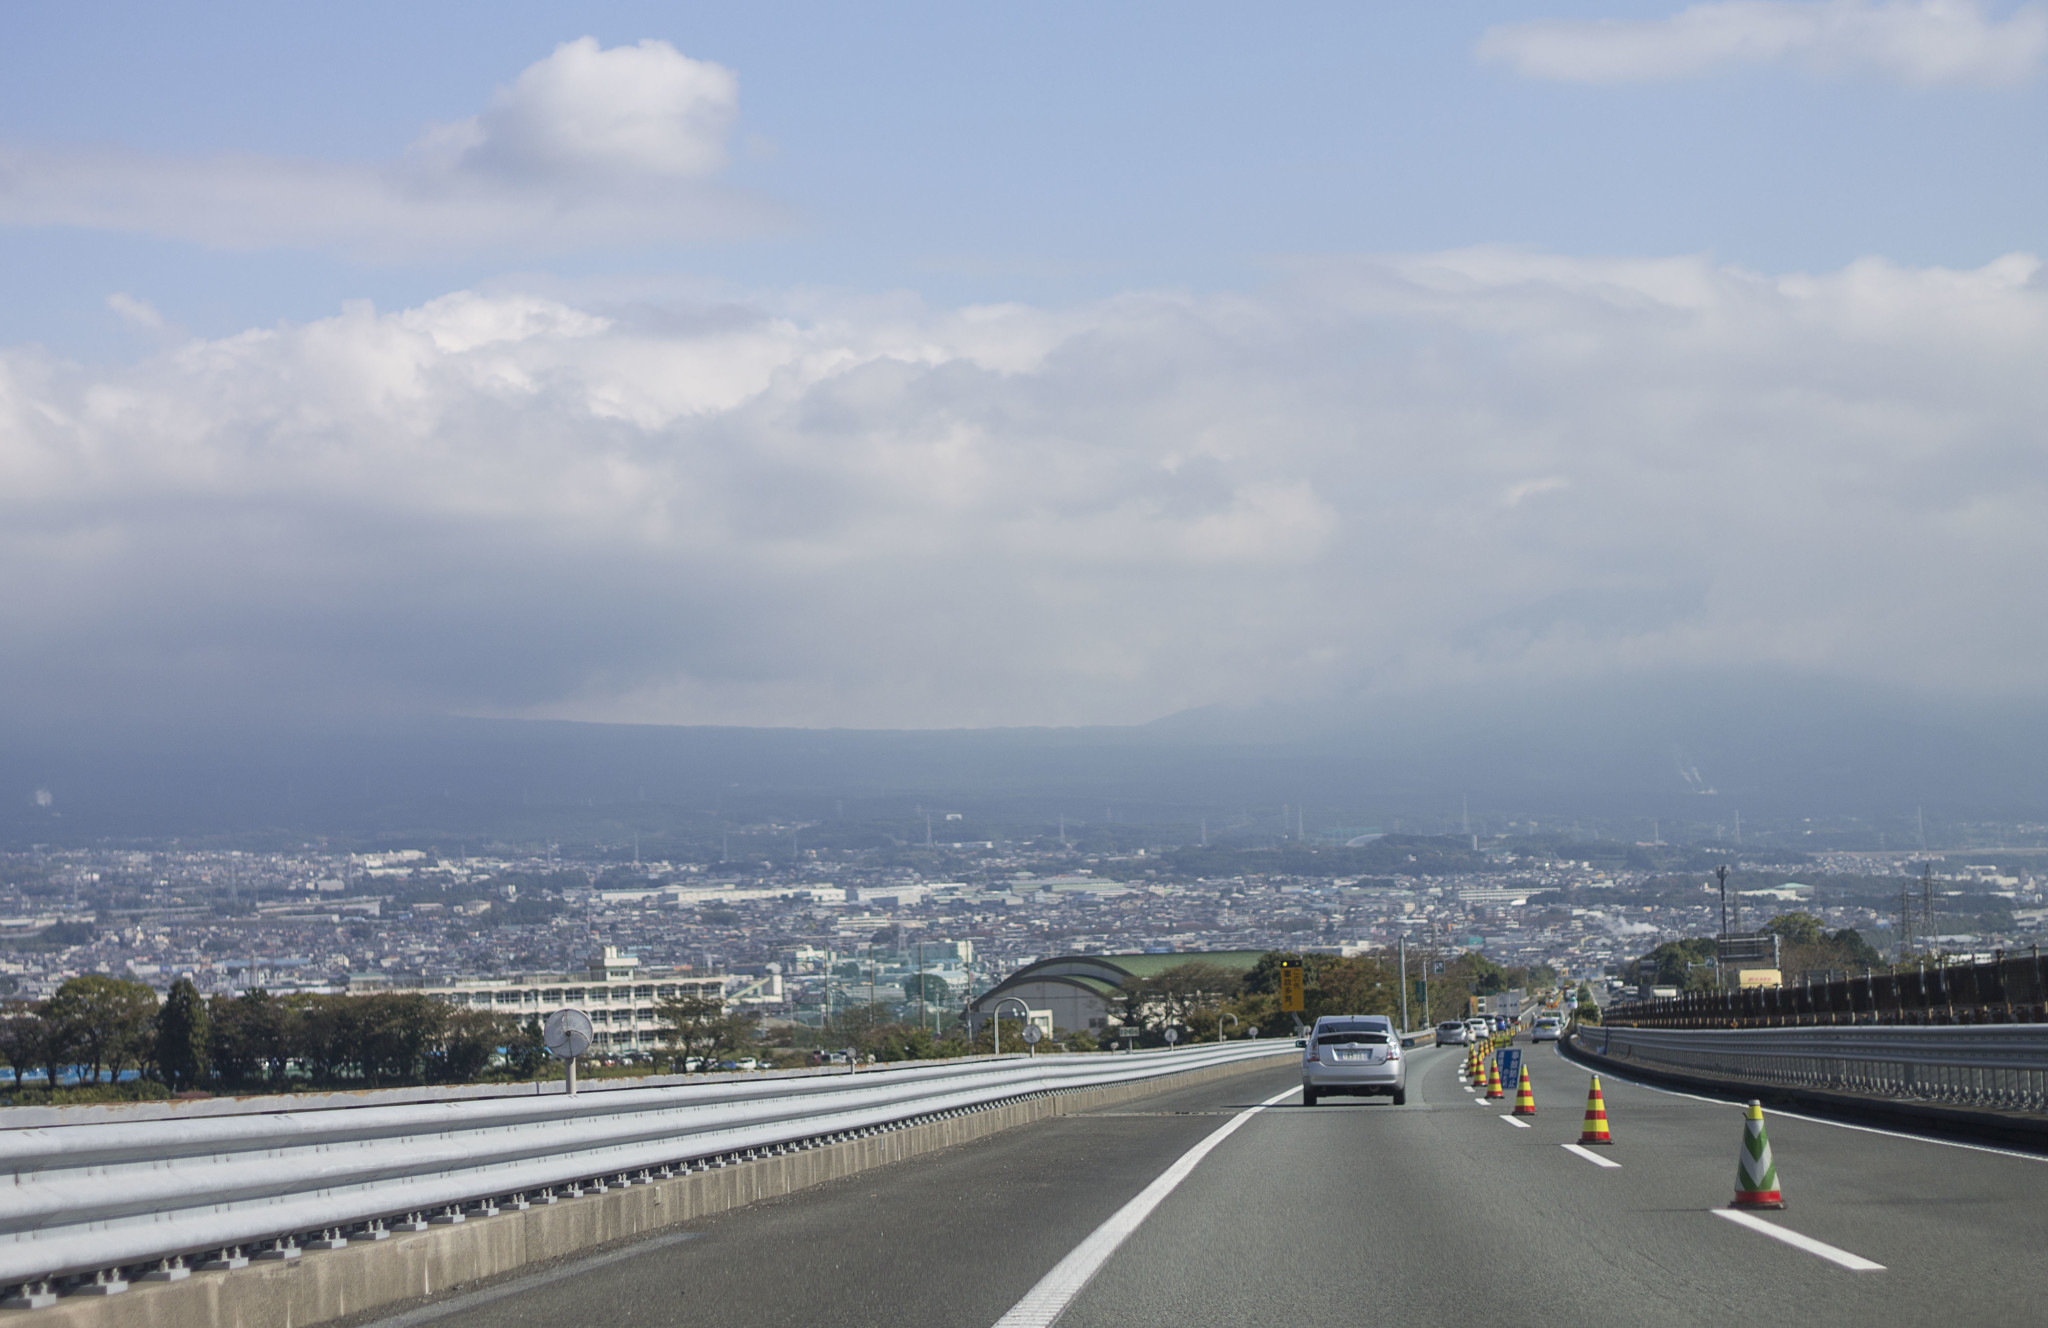 Renting a car and driving in Japan